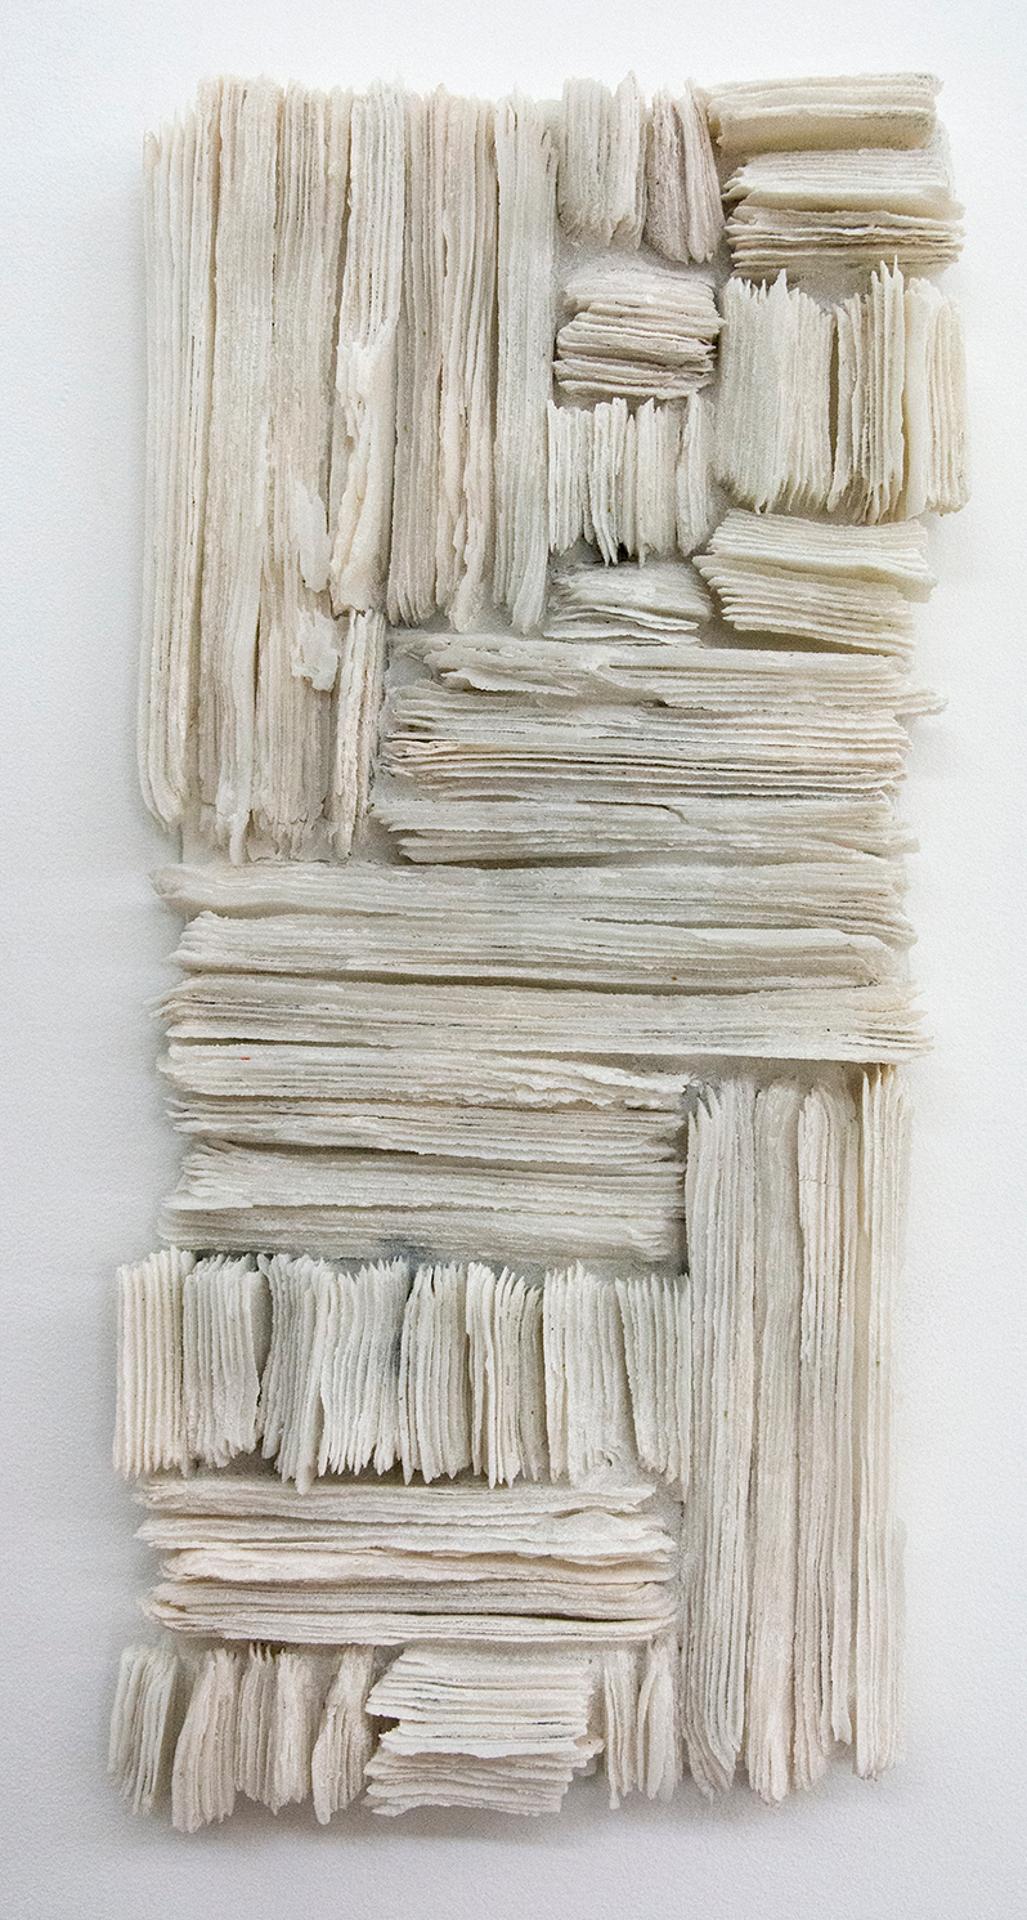 Cheryl Wilson-Smith - Reading Between the Lines, 2018